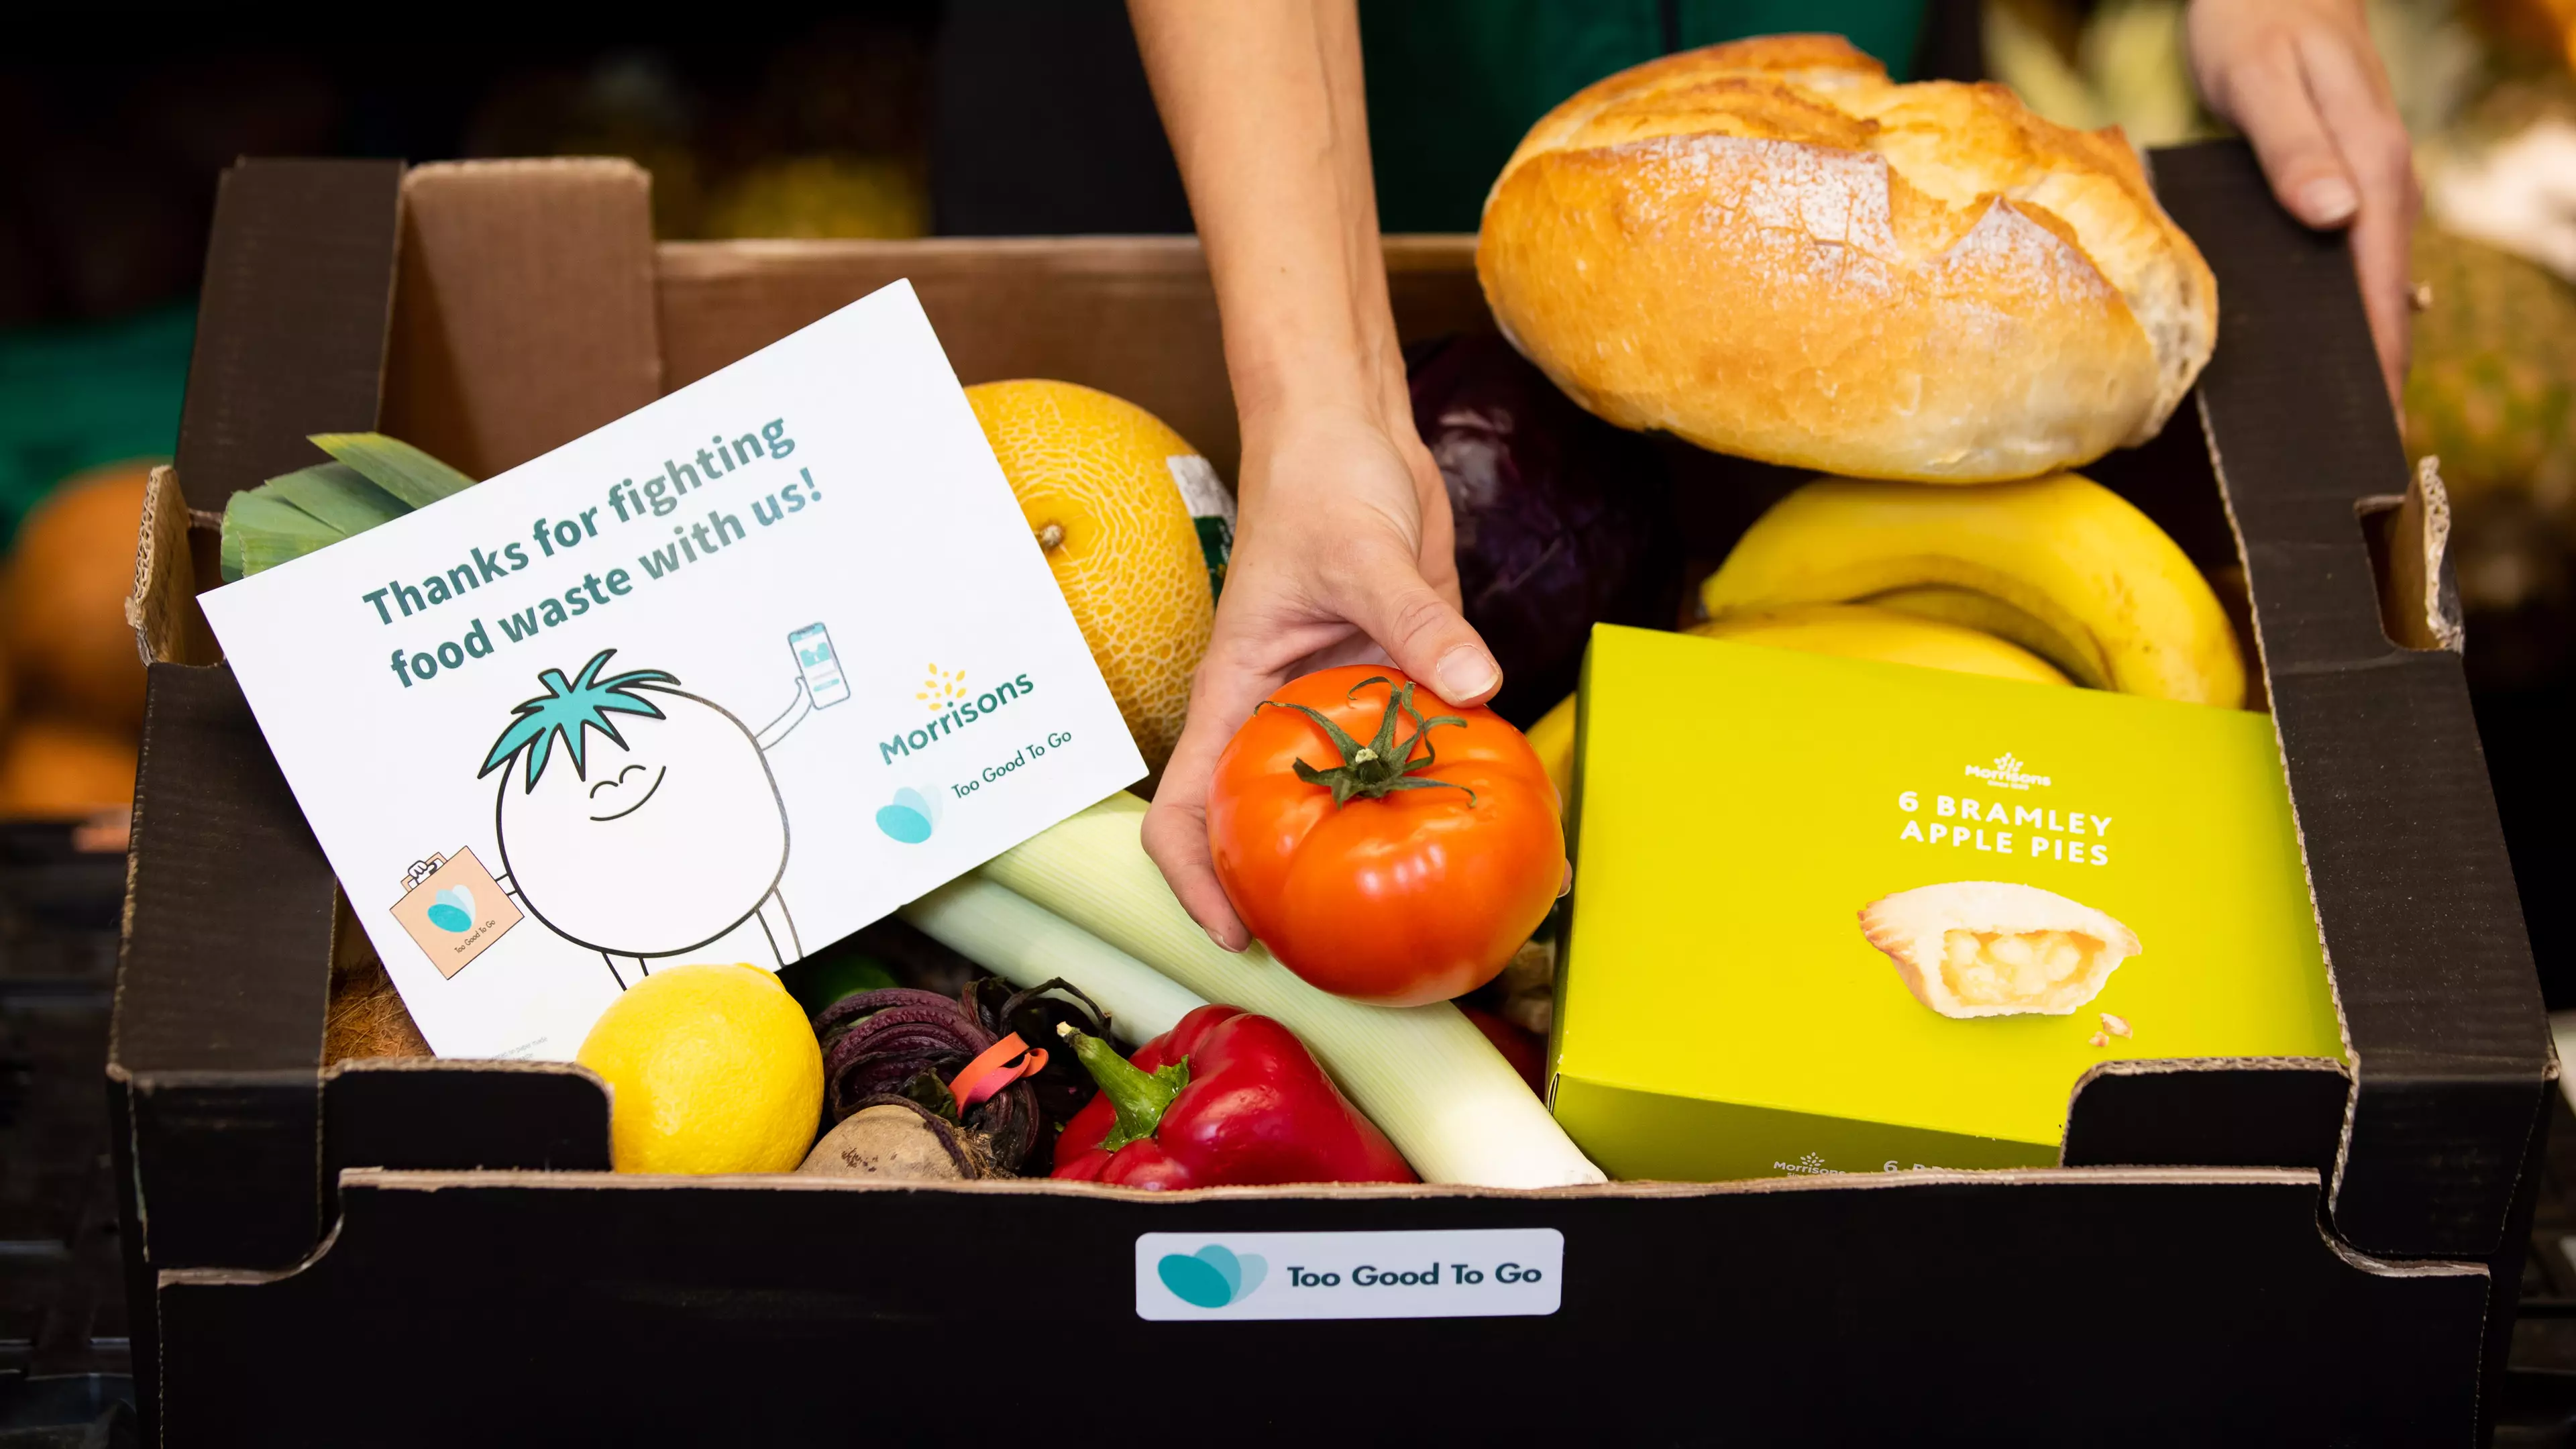 Morrisons To Sell Boxes Of Unsold Food For £3.09 To Reduce Waste